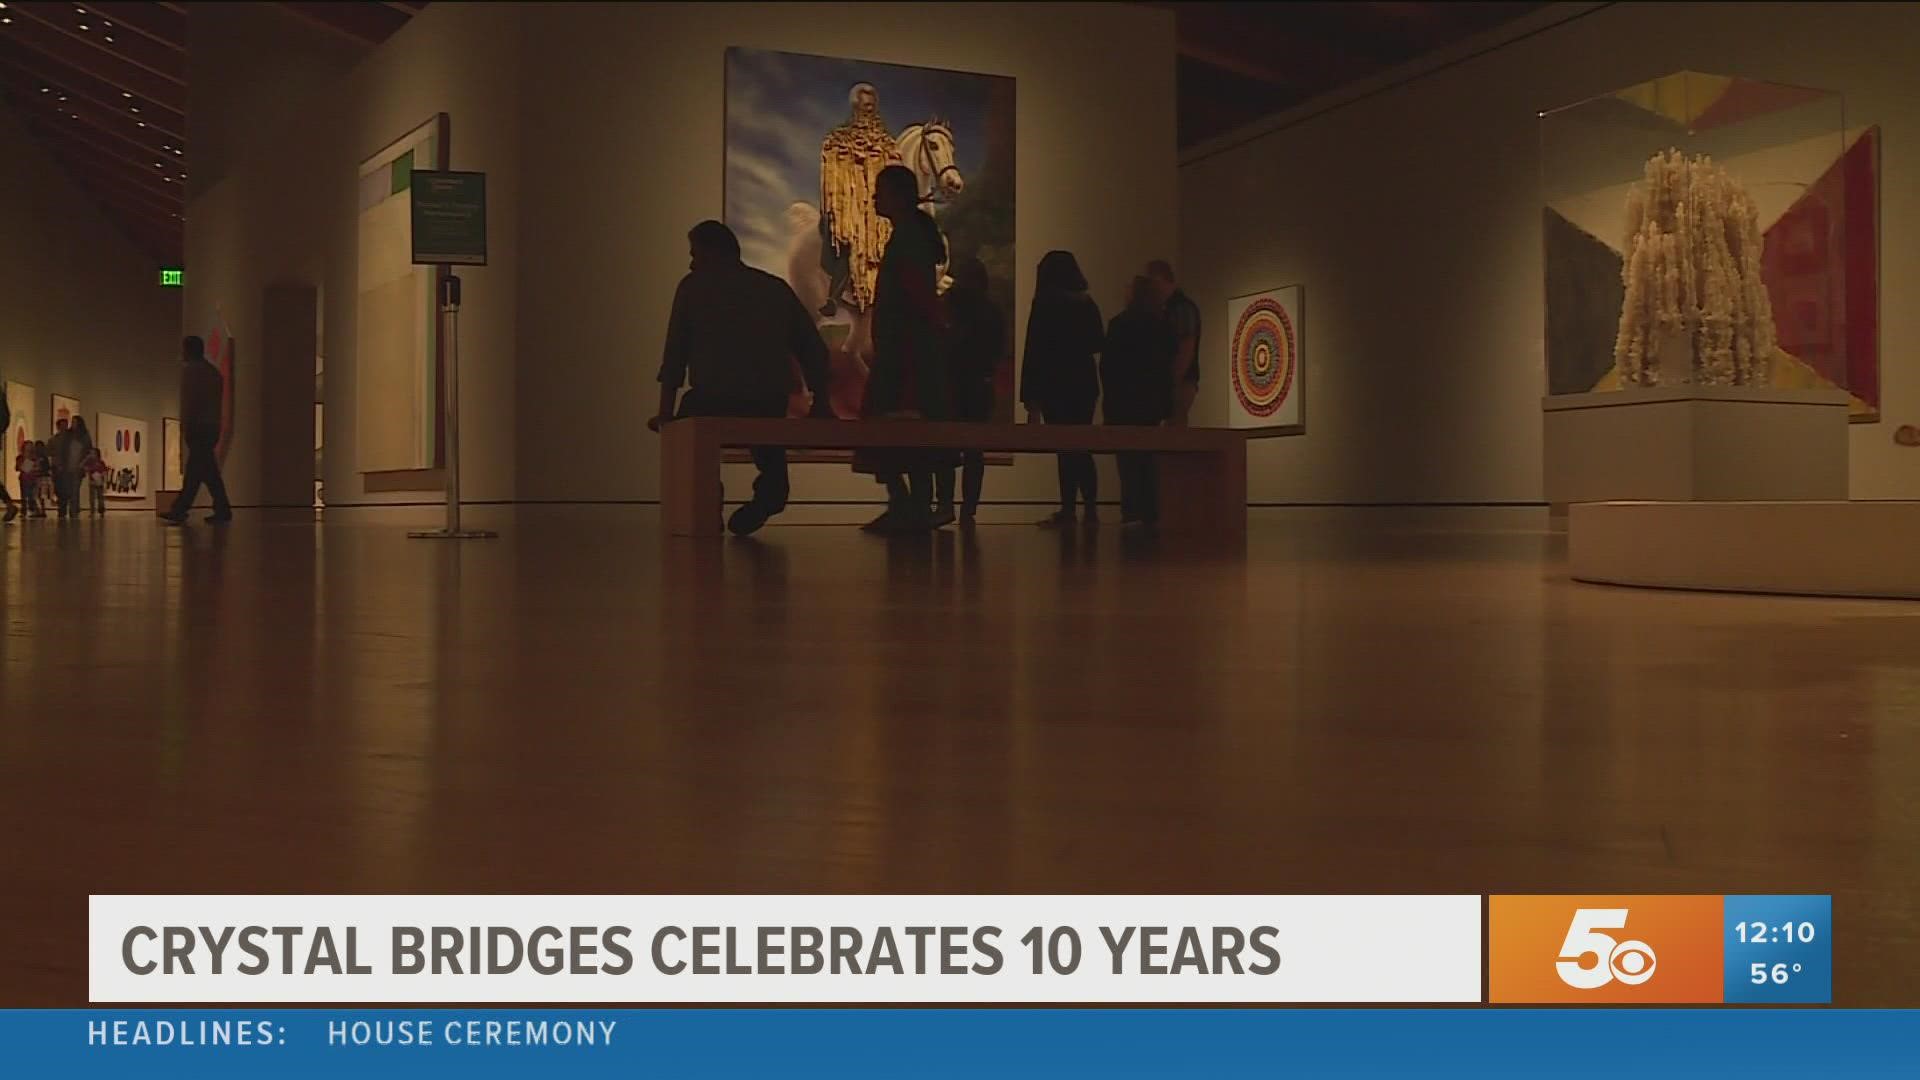 It's been 10 years since Crystal Bridges opened it's doors in Northwest Arkansas and the museum is holding some special celebrations.